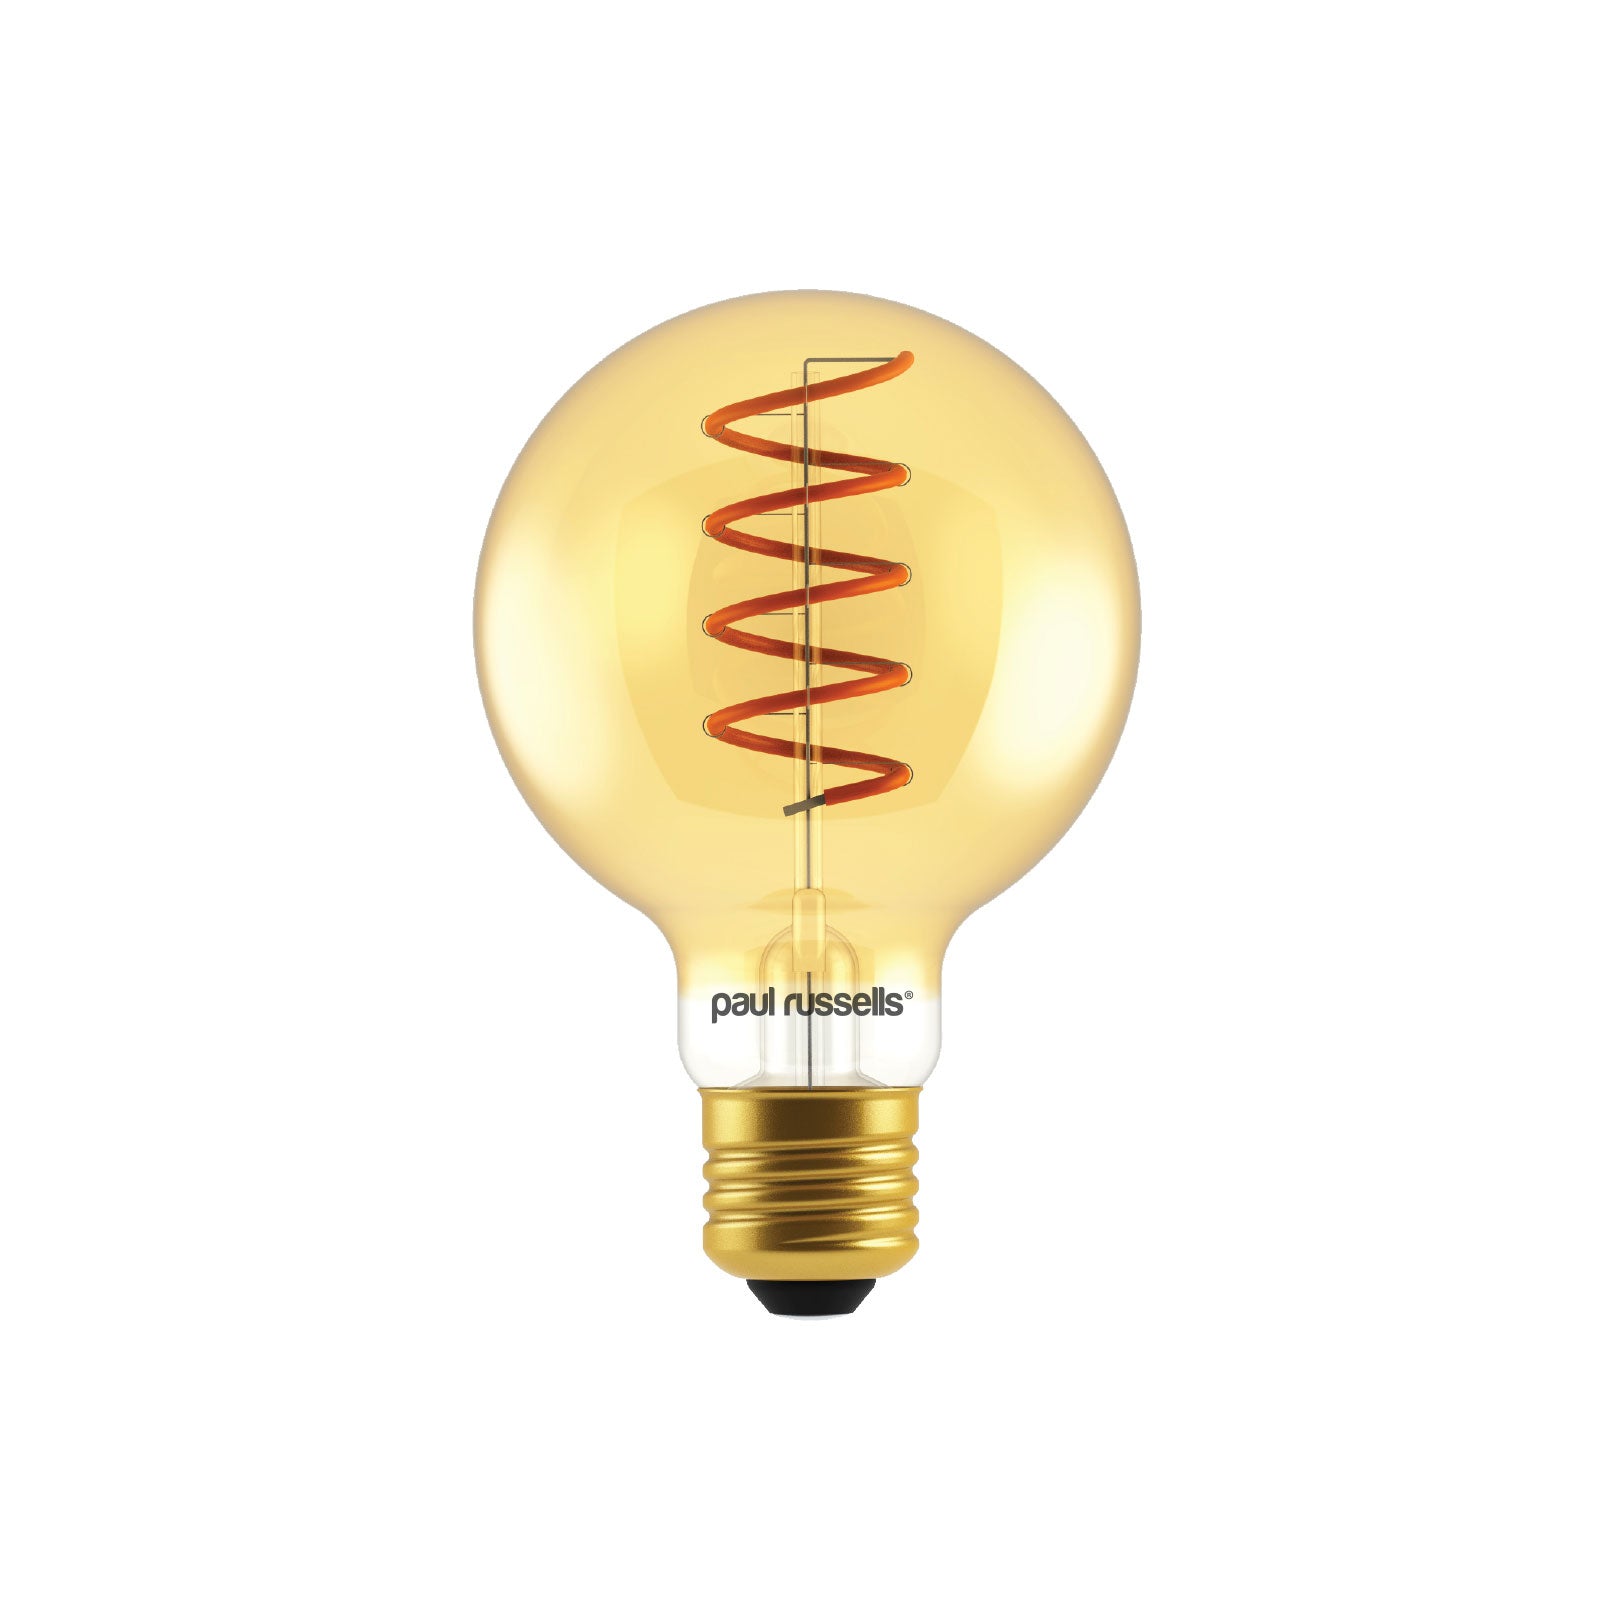 LED Filament Spiral G80 4W=25w Extra Warm White (AMBER) ES E27 Edison –  paul russells | Deckenstrahler